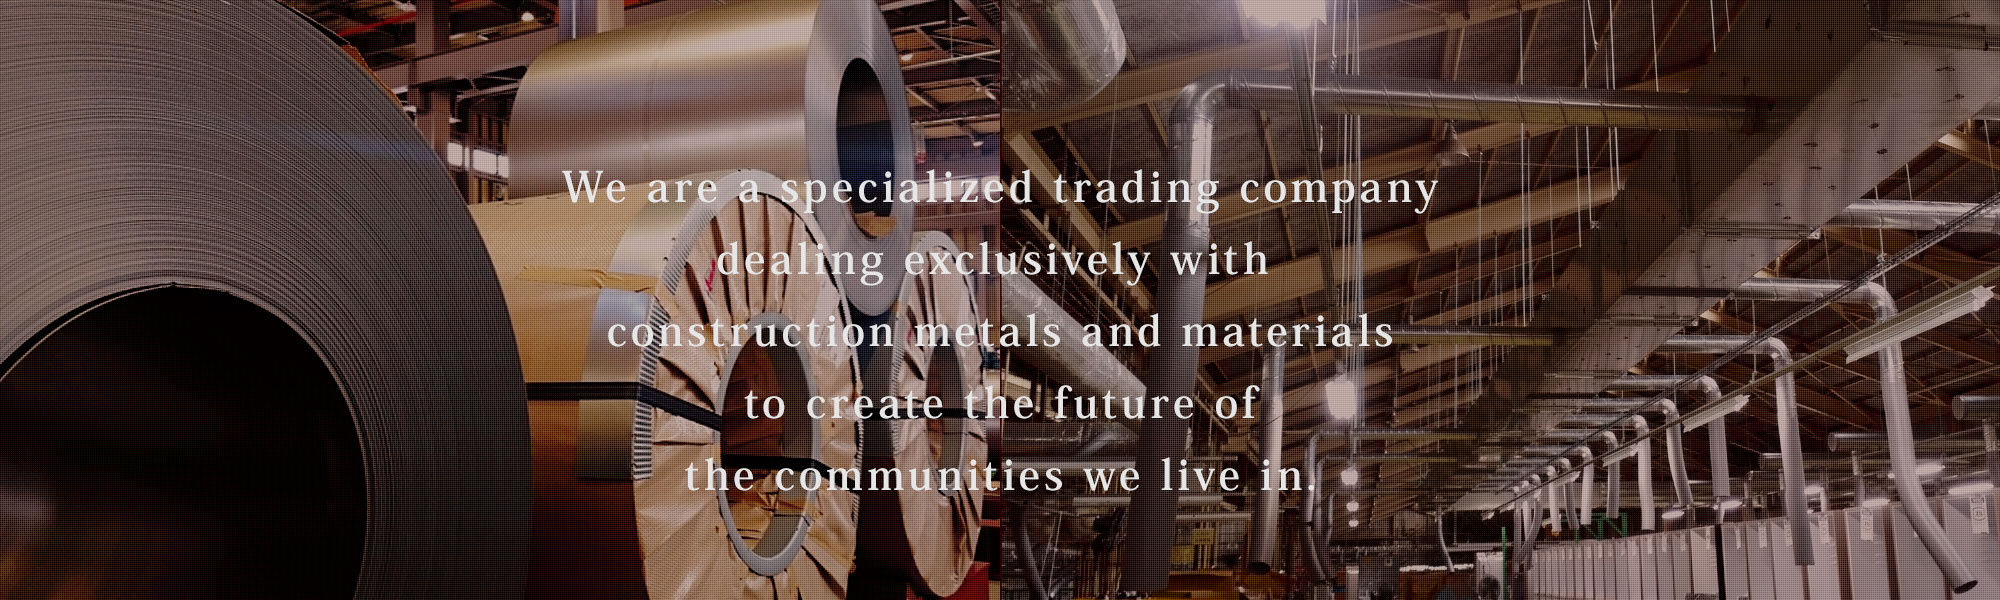 We are a specialized trading company dealing exclusively with construction metals and materials to create the future of the communities we live in.